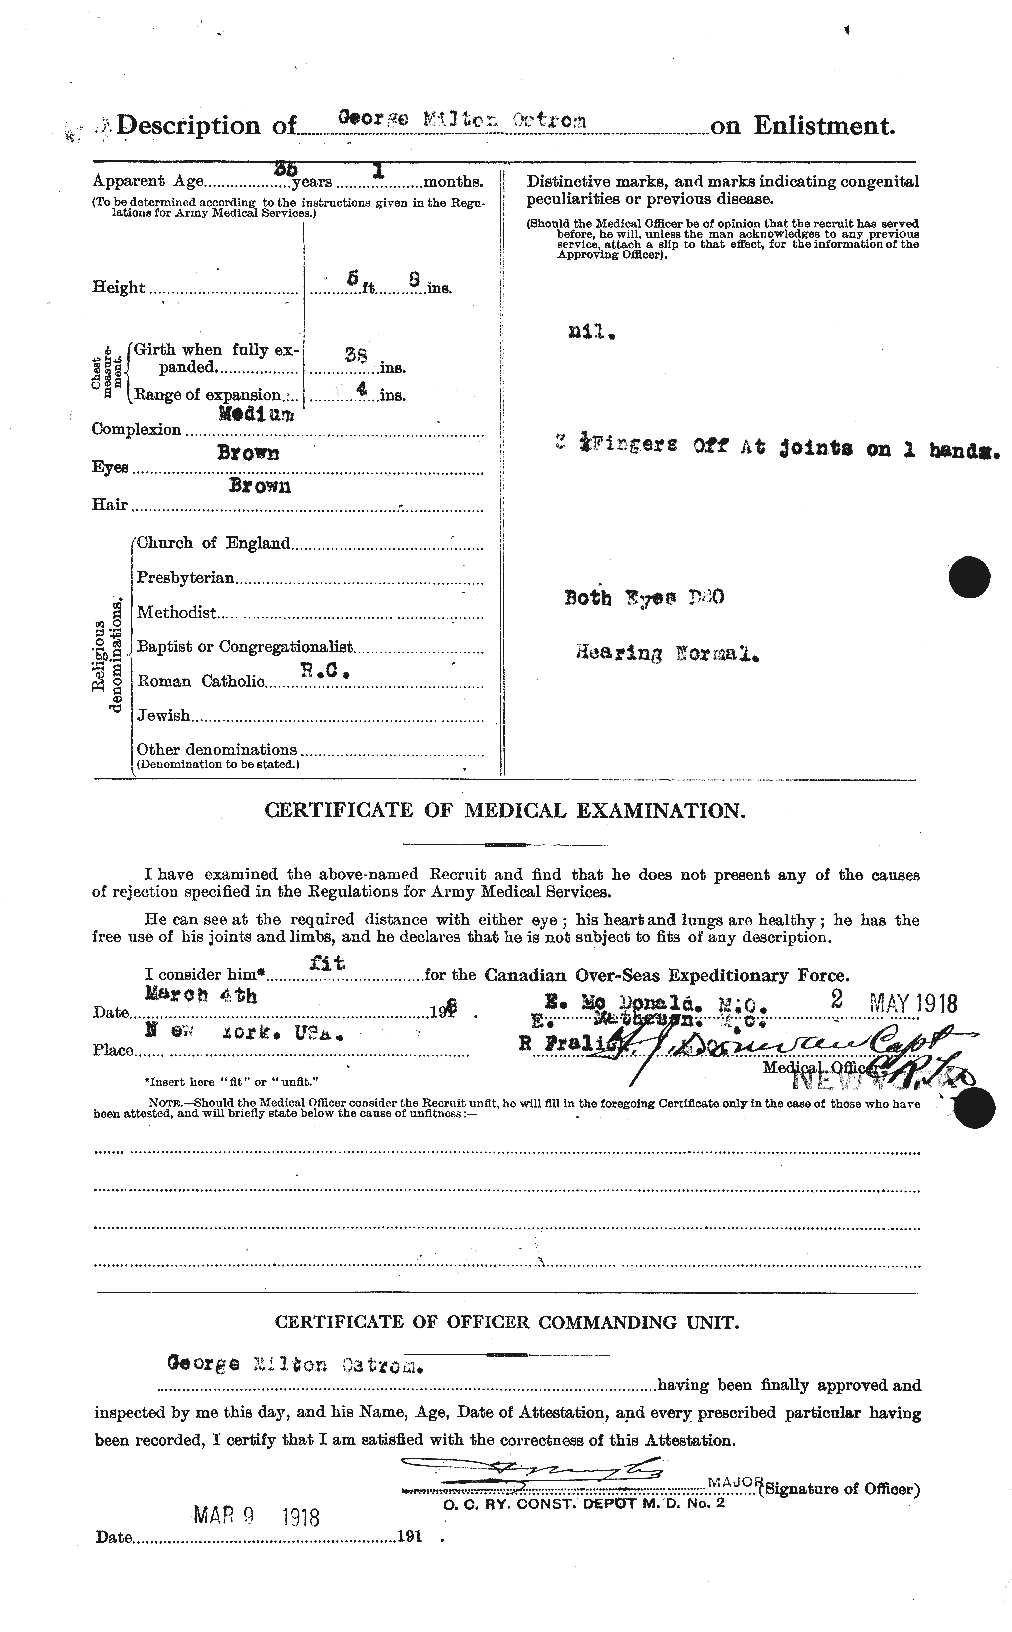 Personnel Records of the First World War - CEF 560270b